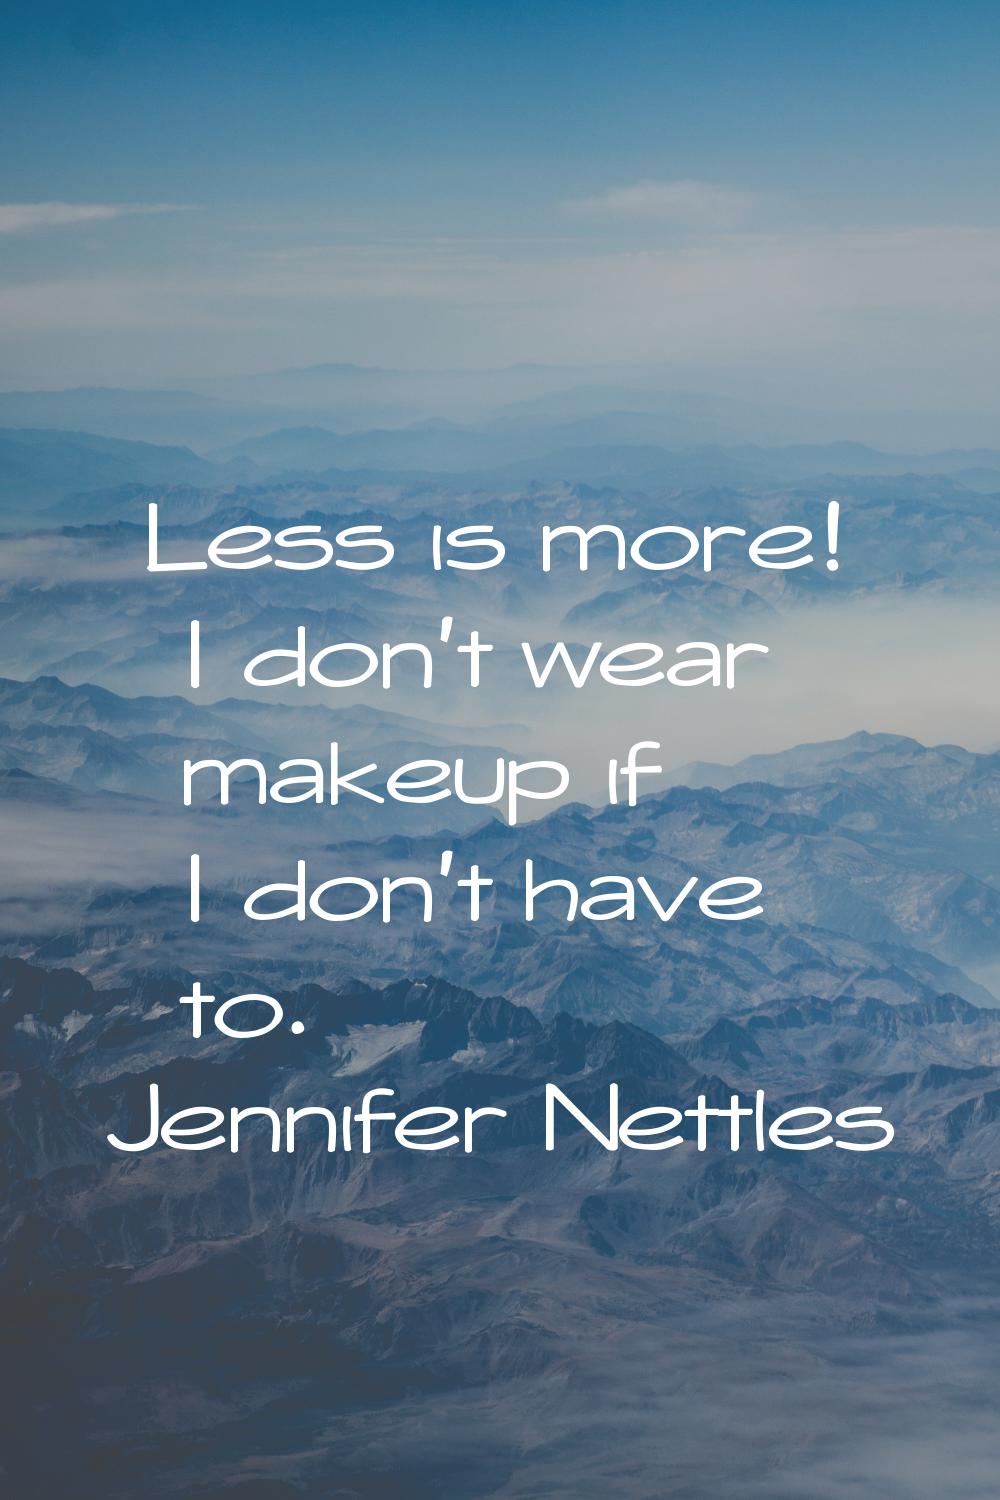 Less is more! I don't wear makeup if I don't have to.